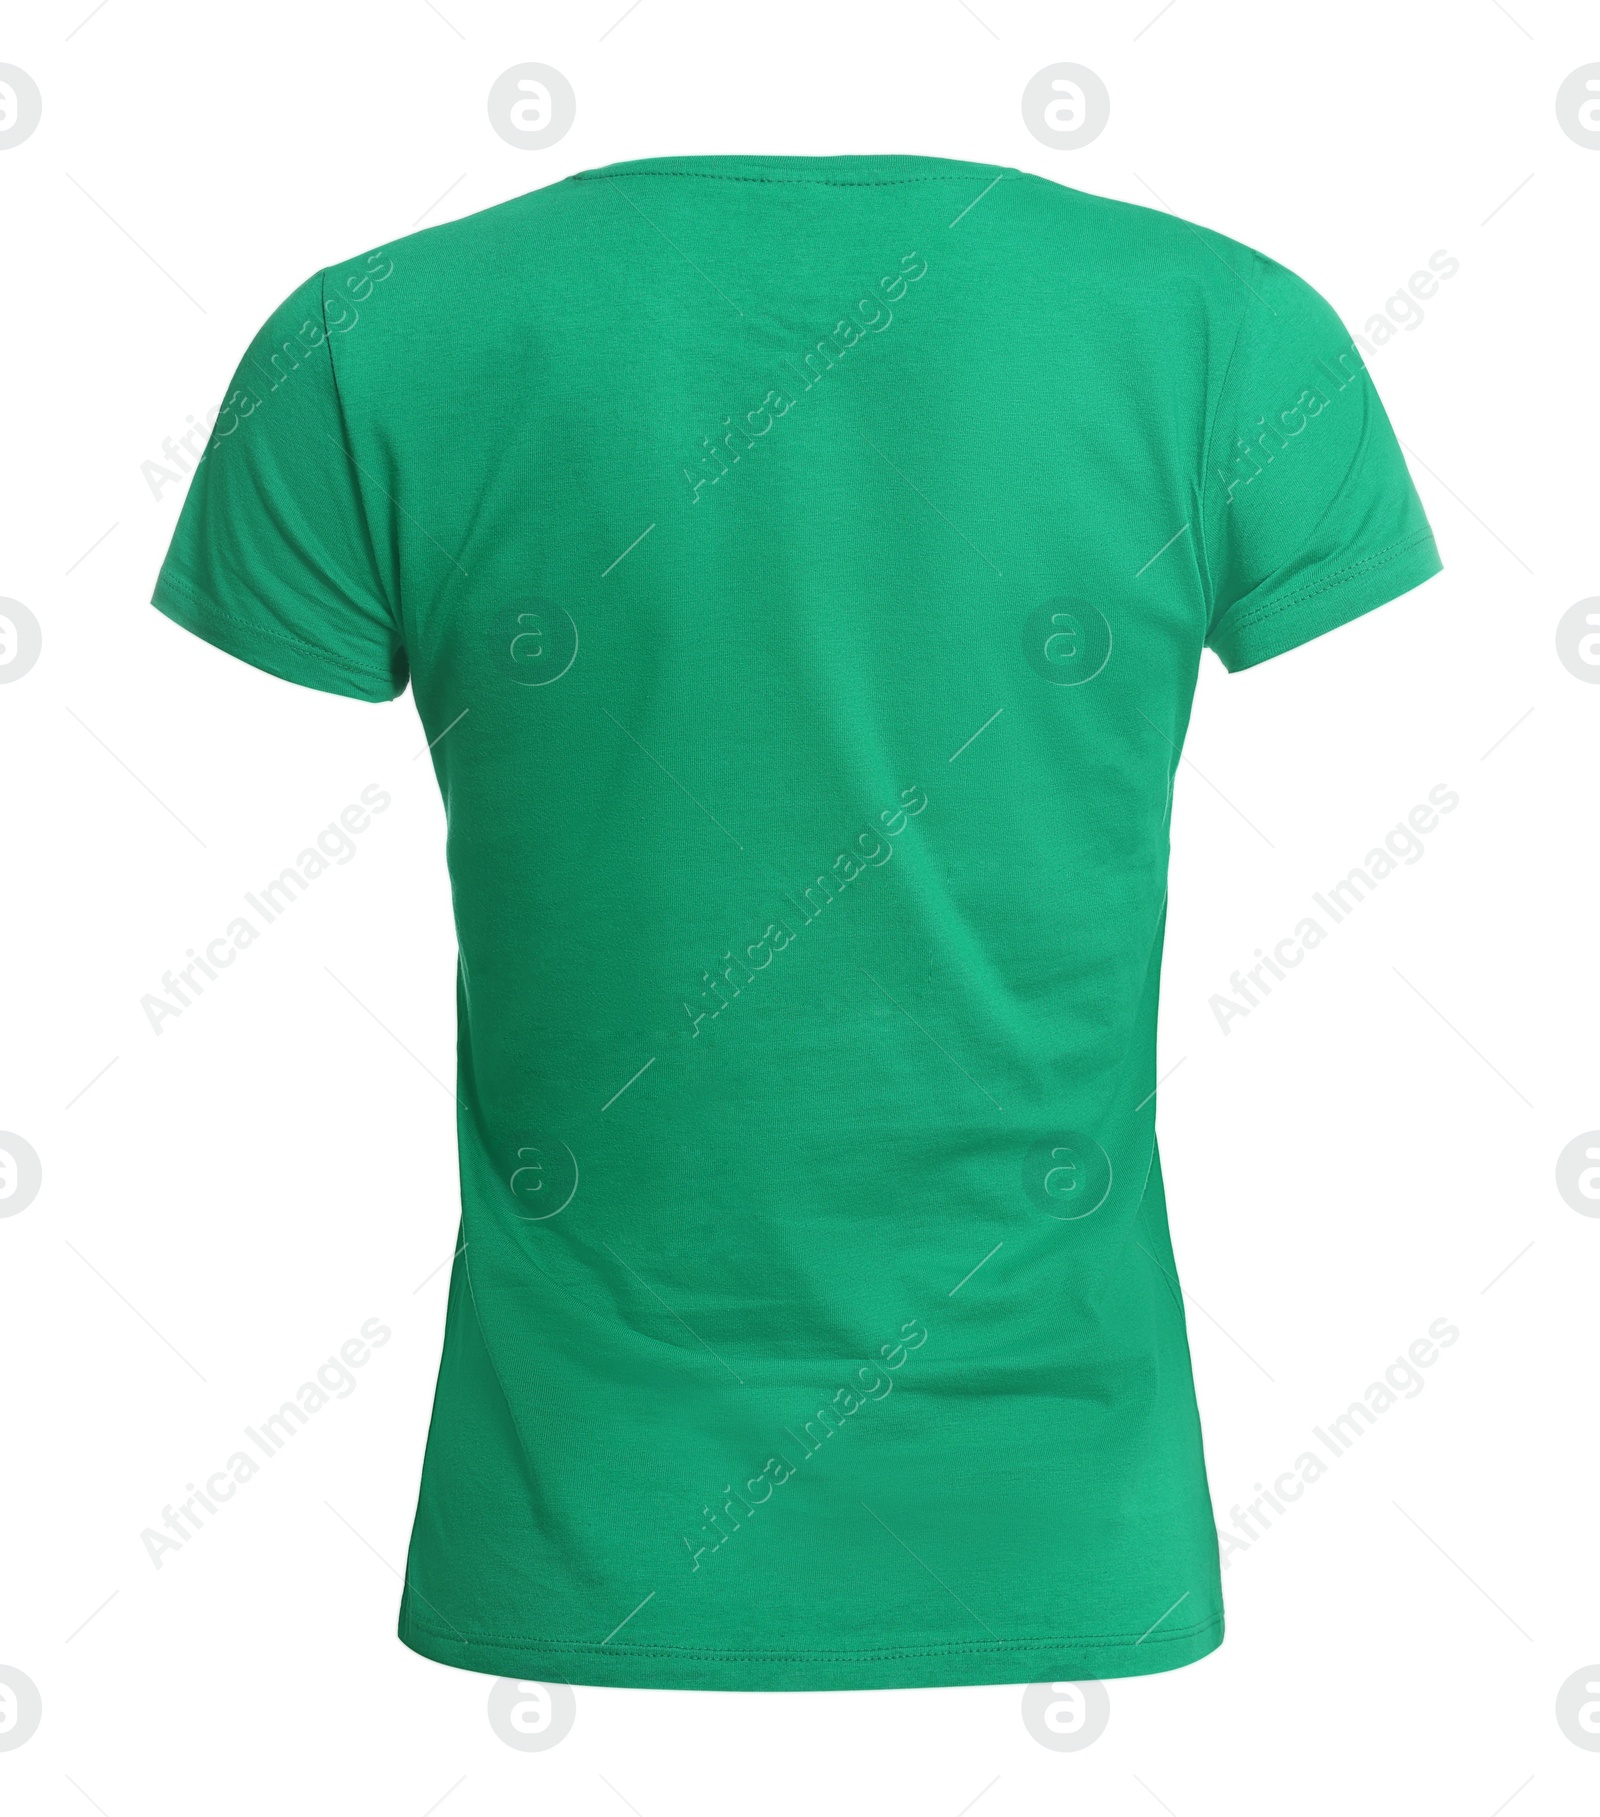 Photo of Stylish green women's t-shirt isolated on white. Mockup for design